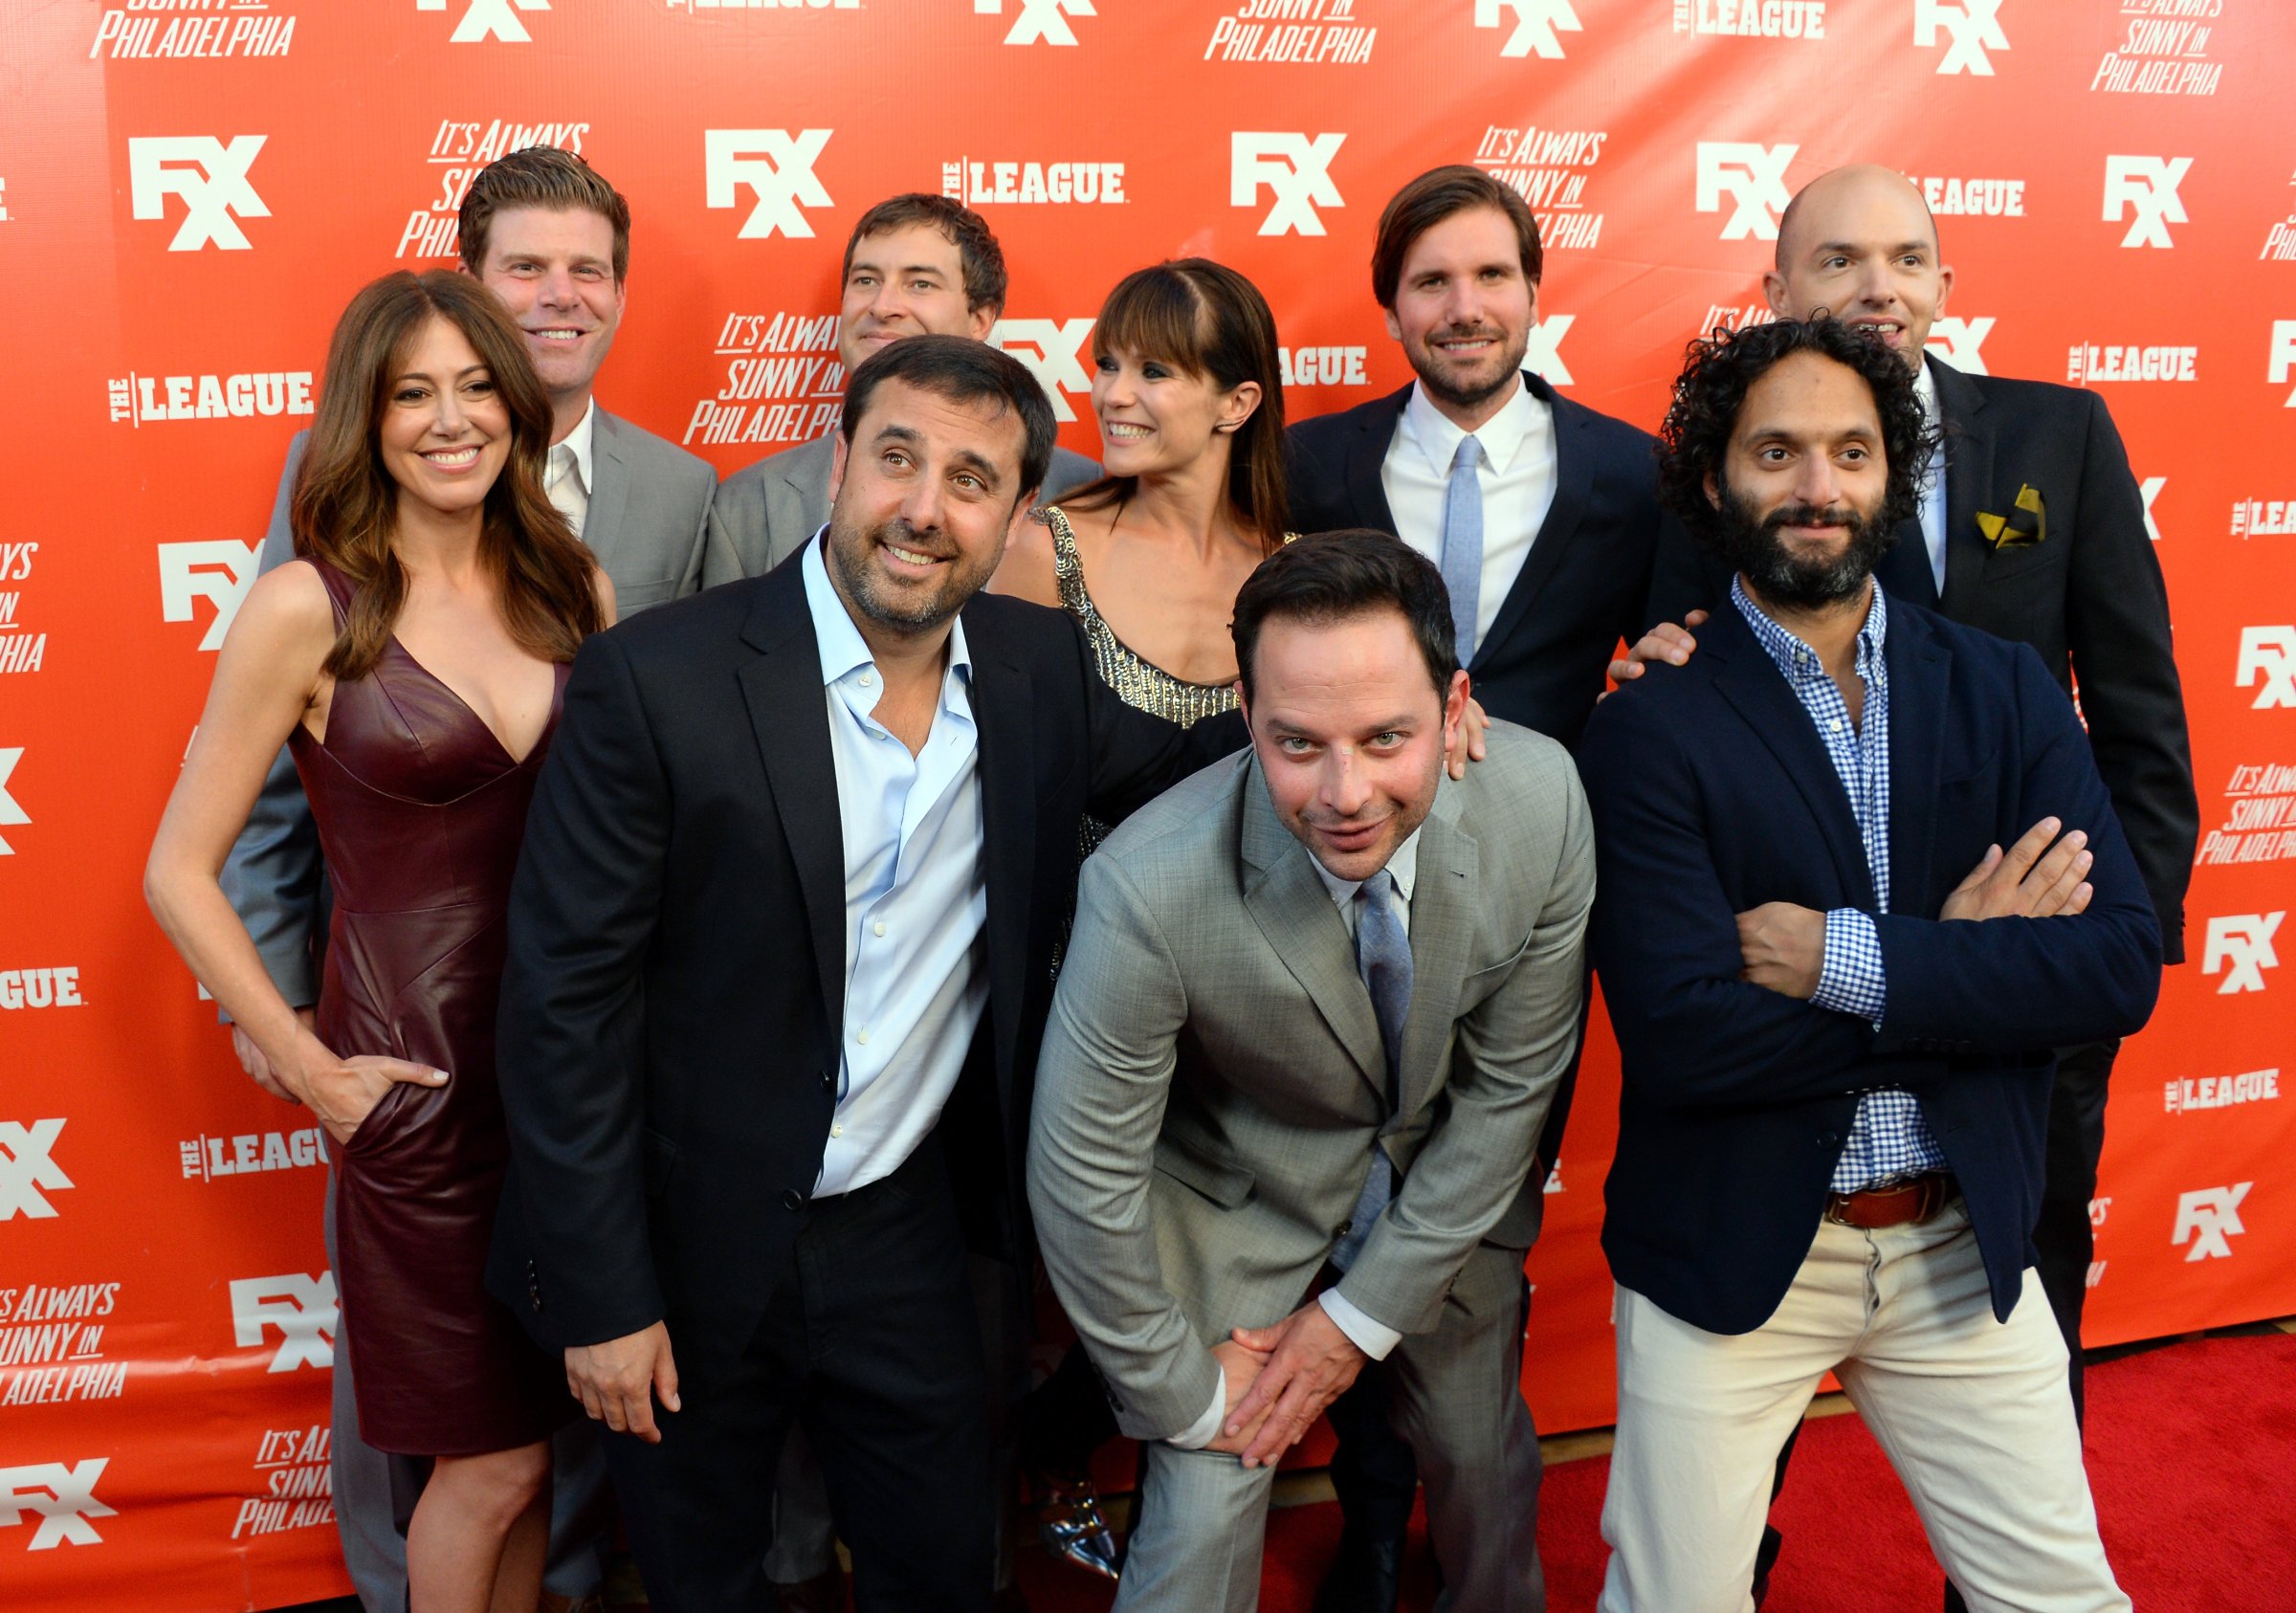 The cast and crew of "The League" attend the premiere and launch party for FXX Network's "It's Always Sunny In Philadelphia" and "The League" at Lure on Sept. 3, 2013 in Hollywood.